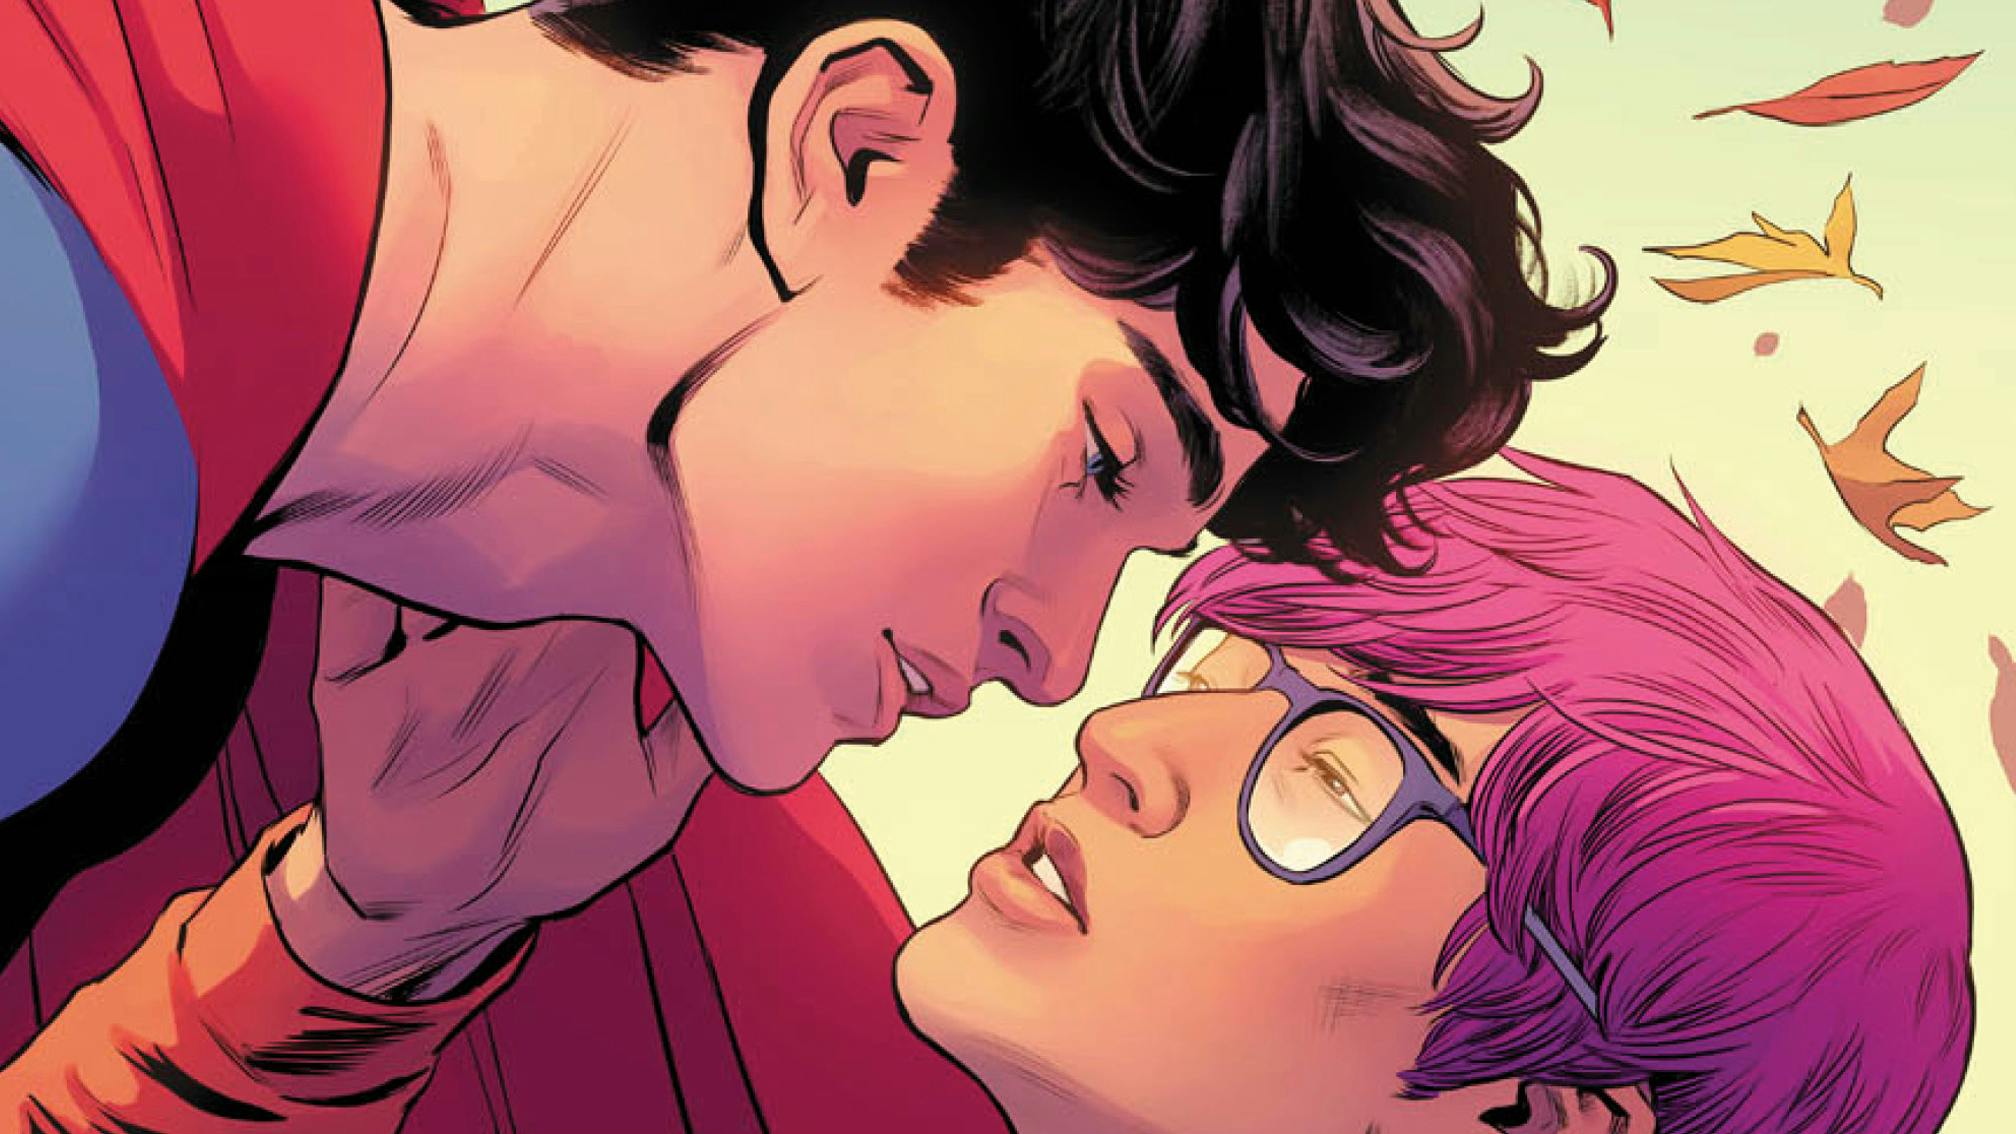 New Superman comes out as bisexual in upcoming DC comic